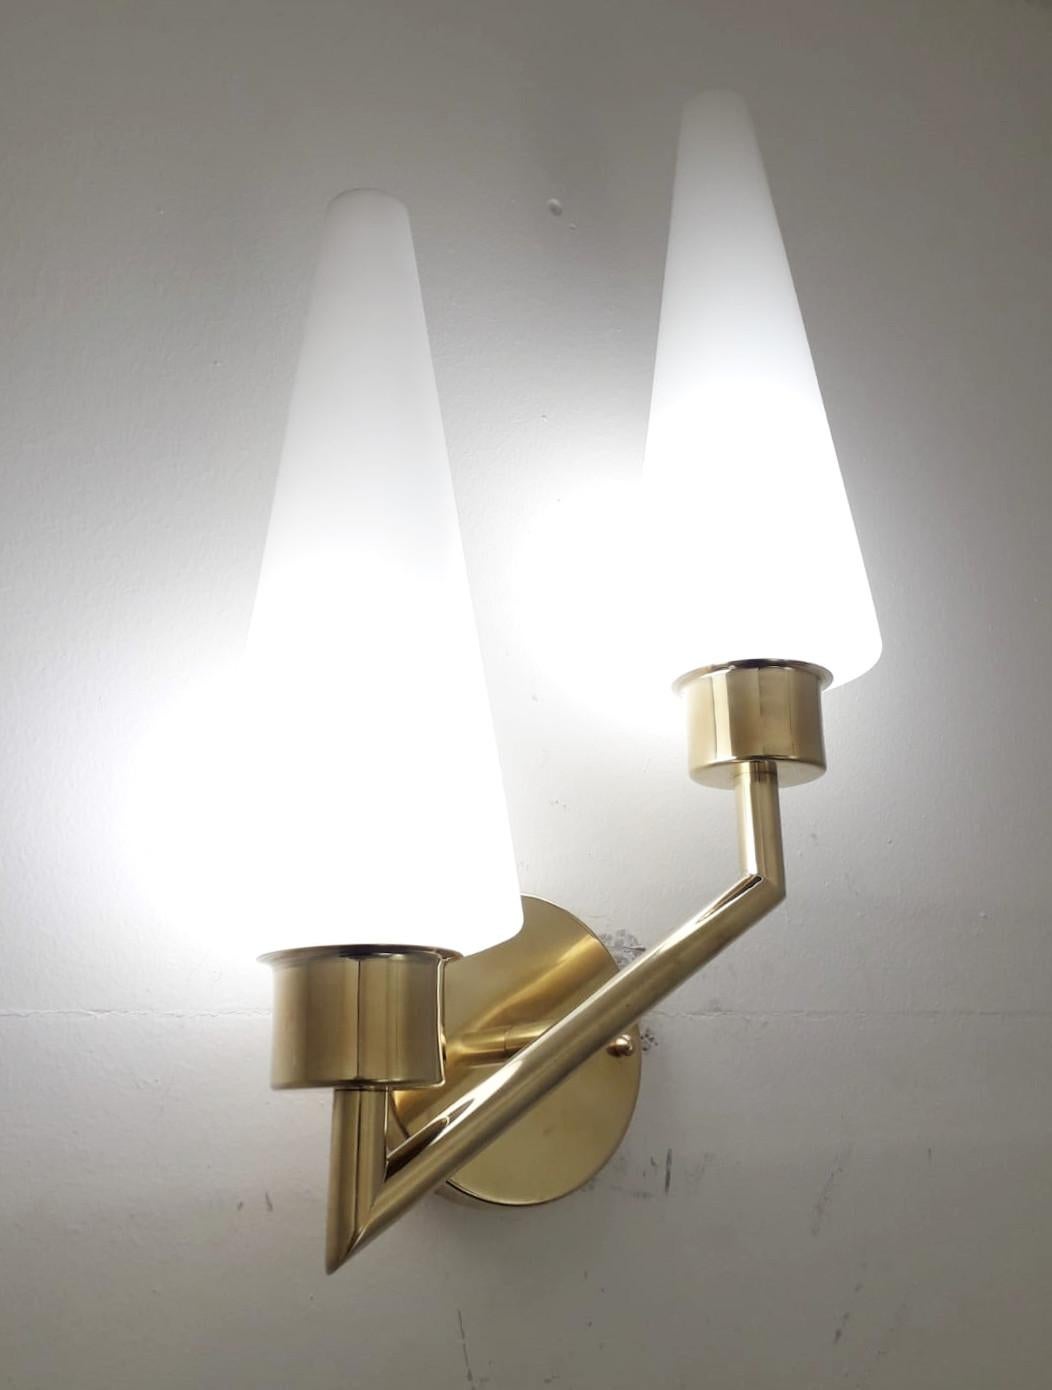 Vintage Italian asymmetrical wall lights with double satin frosted opaline cone shaped glass shades mounted on elegant brass frames by Stilnovo / Made in Italy, circa 1970s
2-light / E14 type / max 40W each
Measures: Height 20 inches, width 11